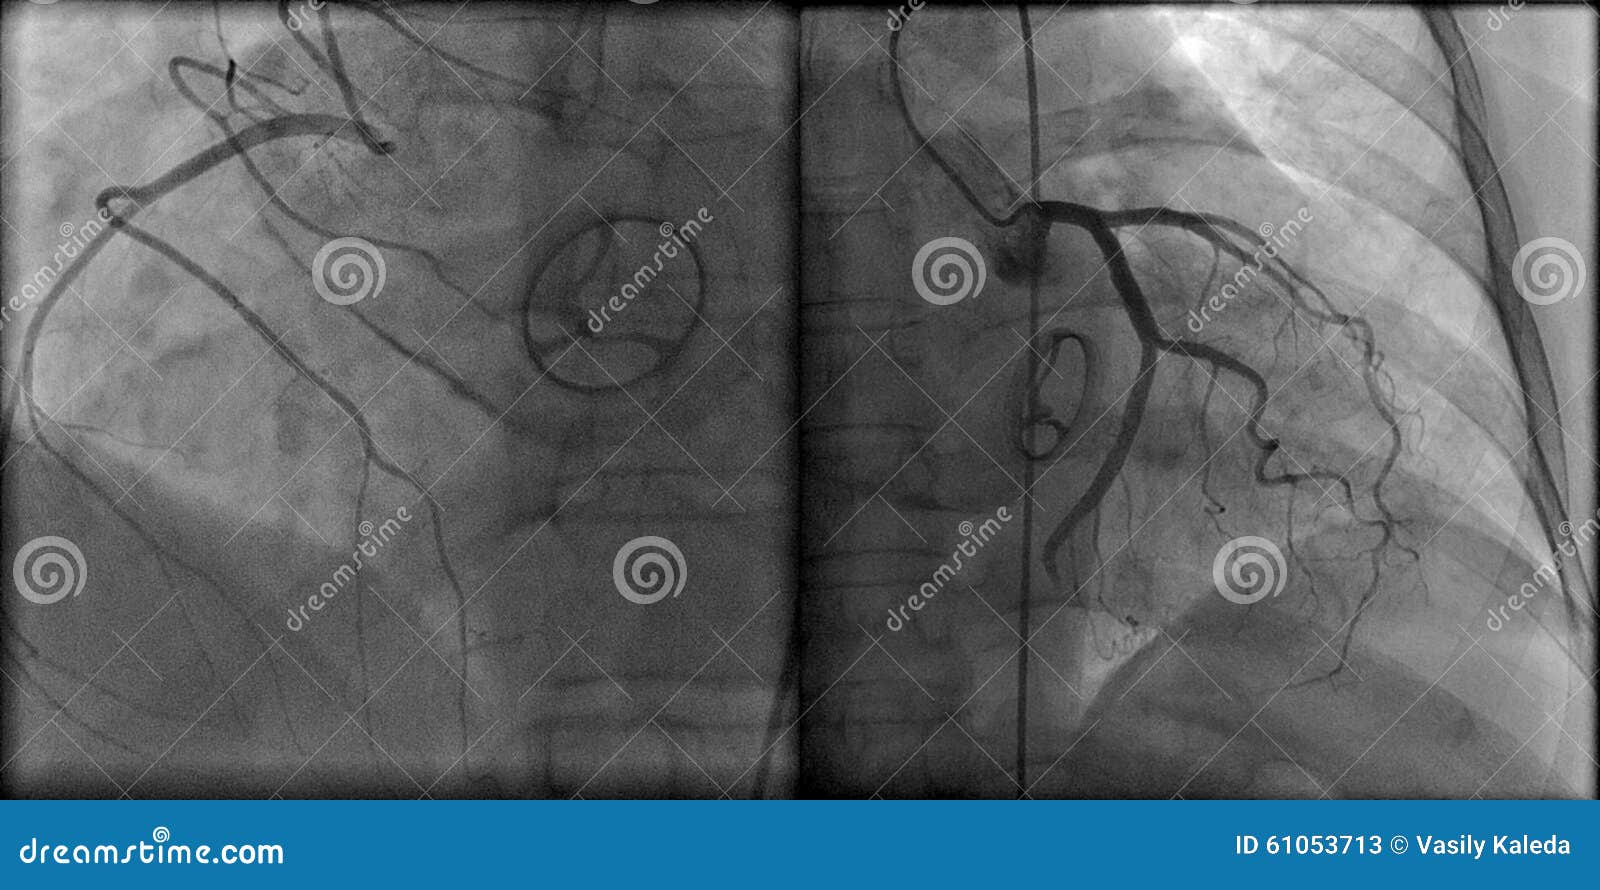 prosthetic heart valve and contrasted coronary arteries on roentgenogram